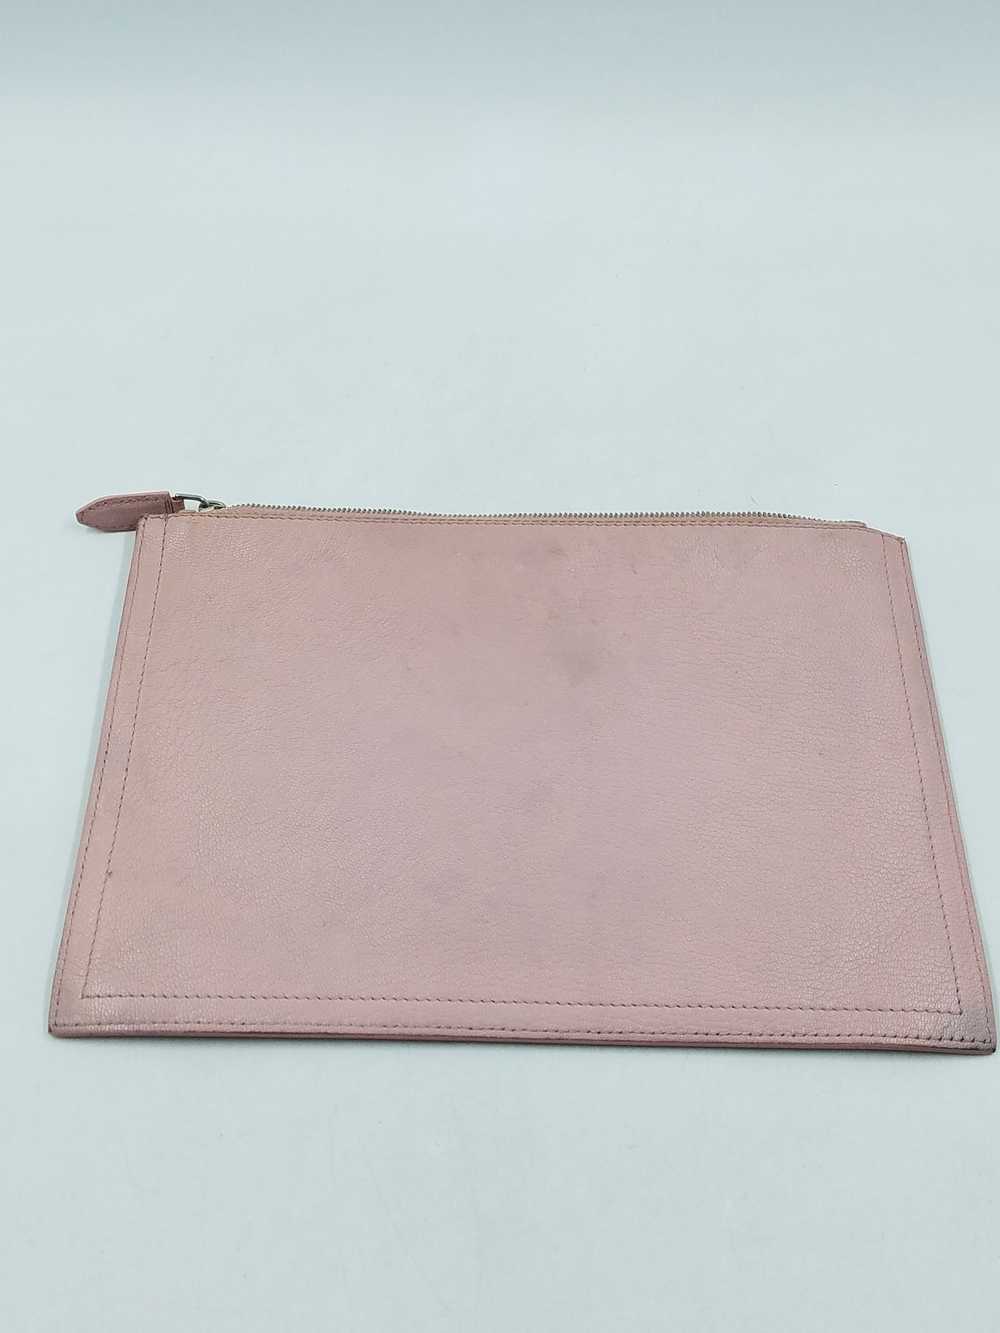 Authentic Givenchy Carnation Pink Clutch - image 2